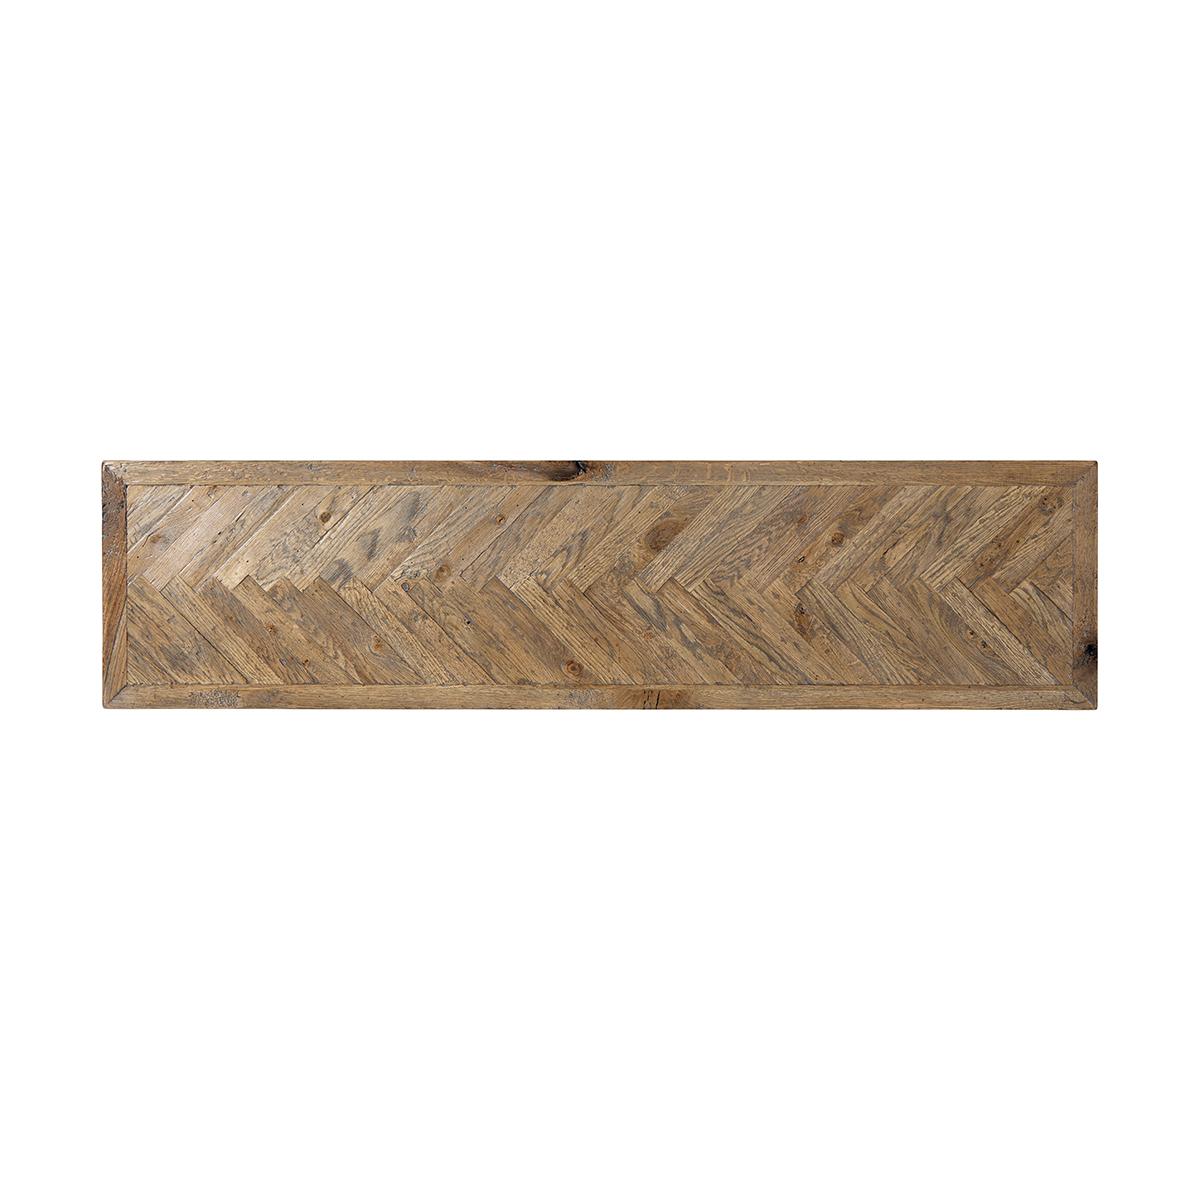 Chevron Modern console table, with a chevron oak parquetry top above a dark oak solid base with stretcher.

Dimensions: 60